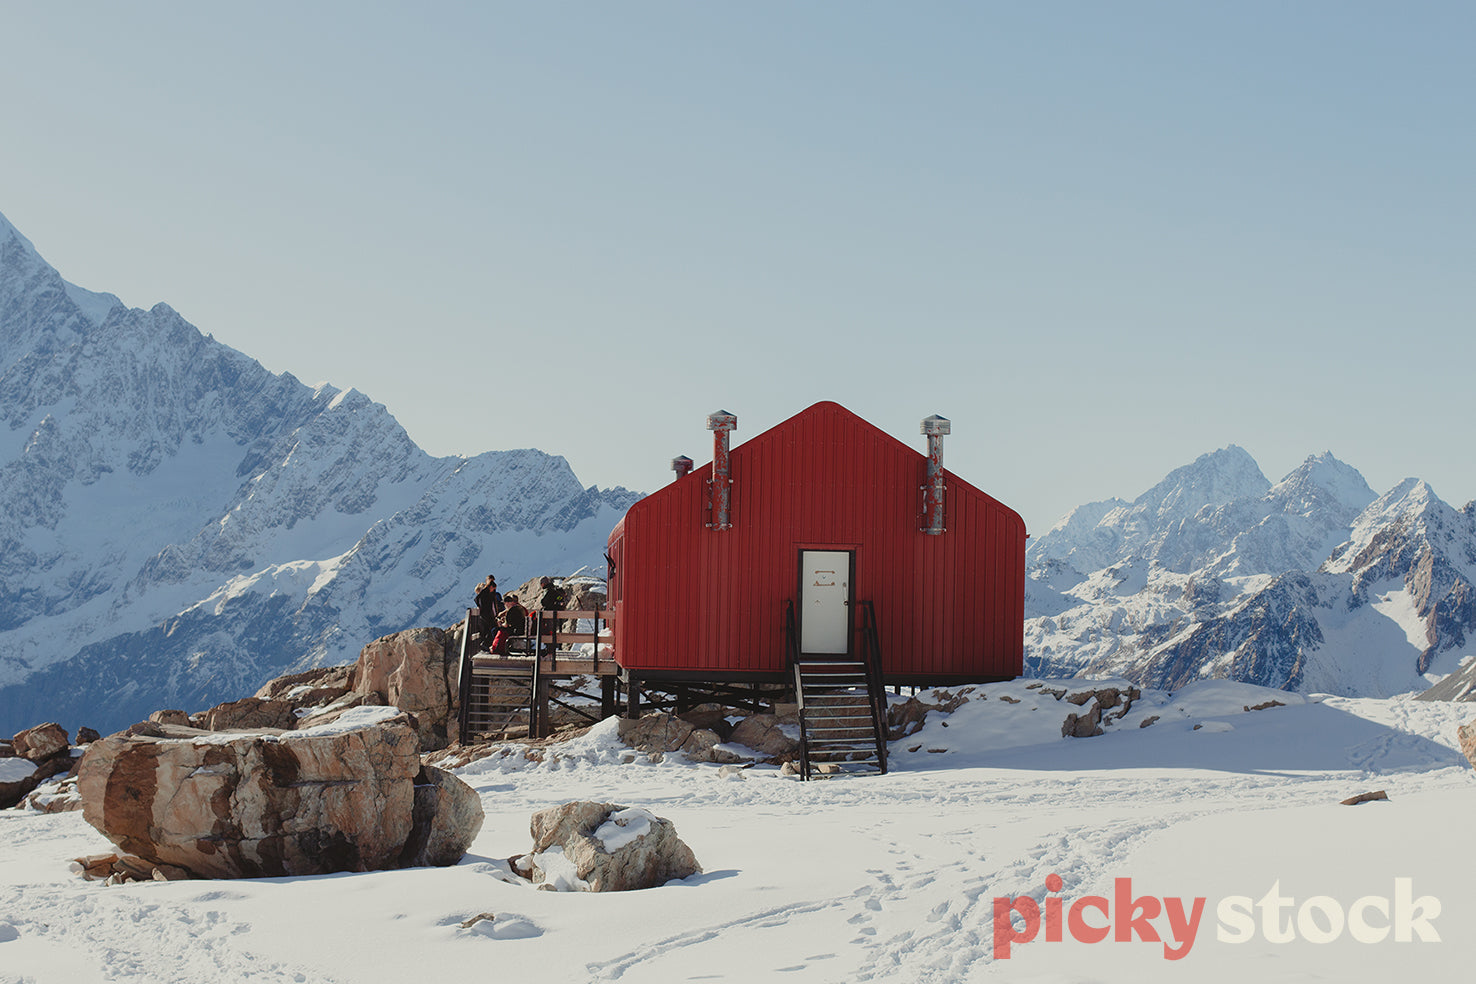 Landscape view of Muller Hut in Mount Cook during the day. Hut is red with a white door. Three people are standing outside on the deck with their tramping hiking equipment and gear. Mountains in the background covered in snow. Some rocks are exposed.